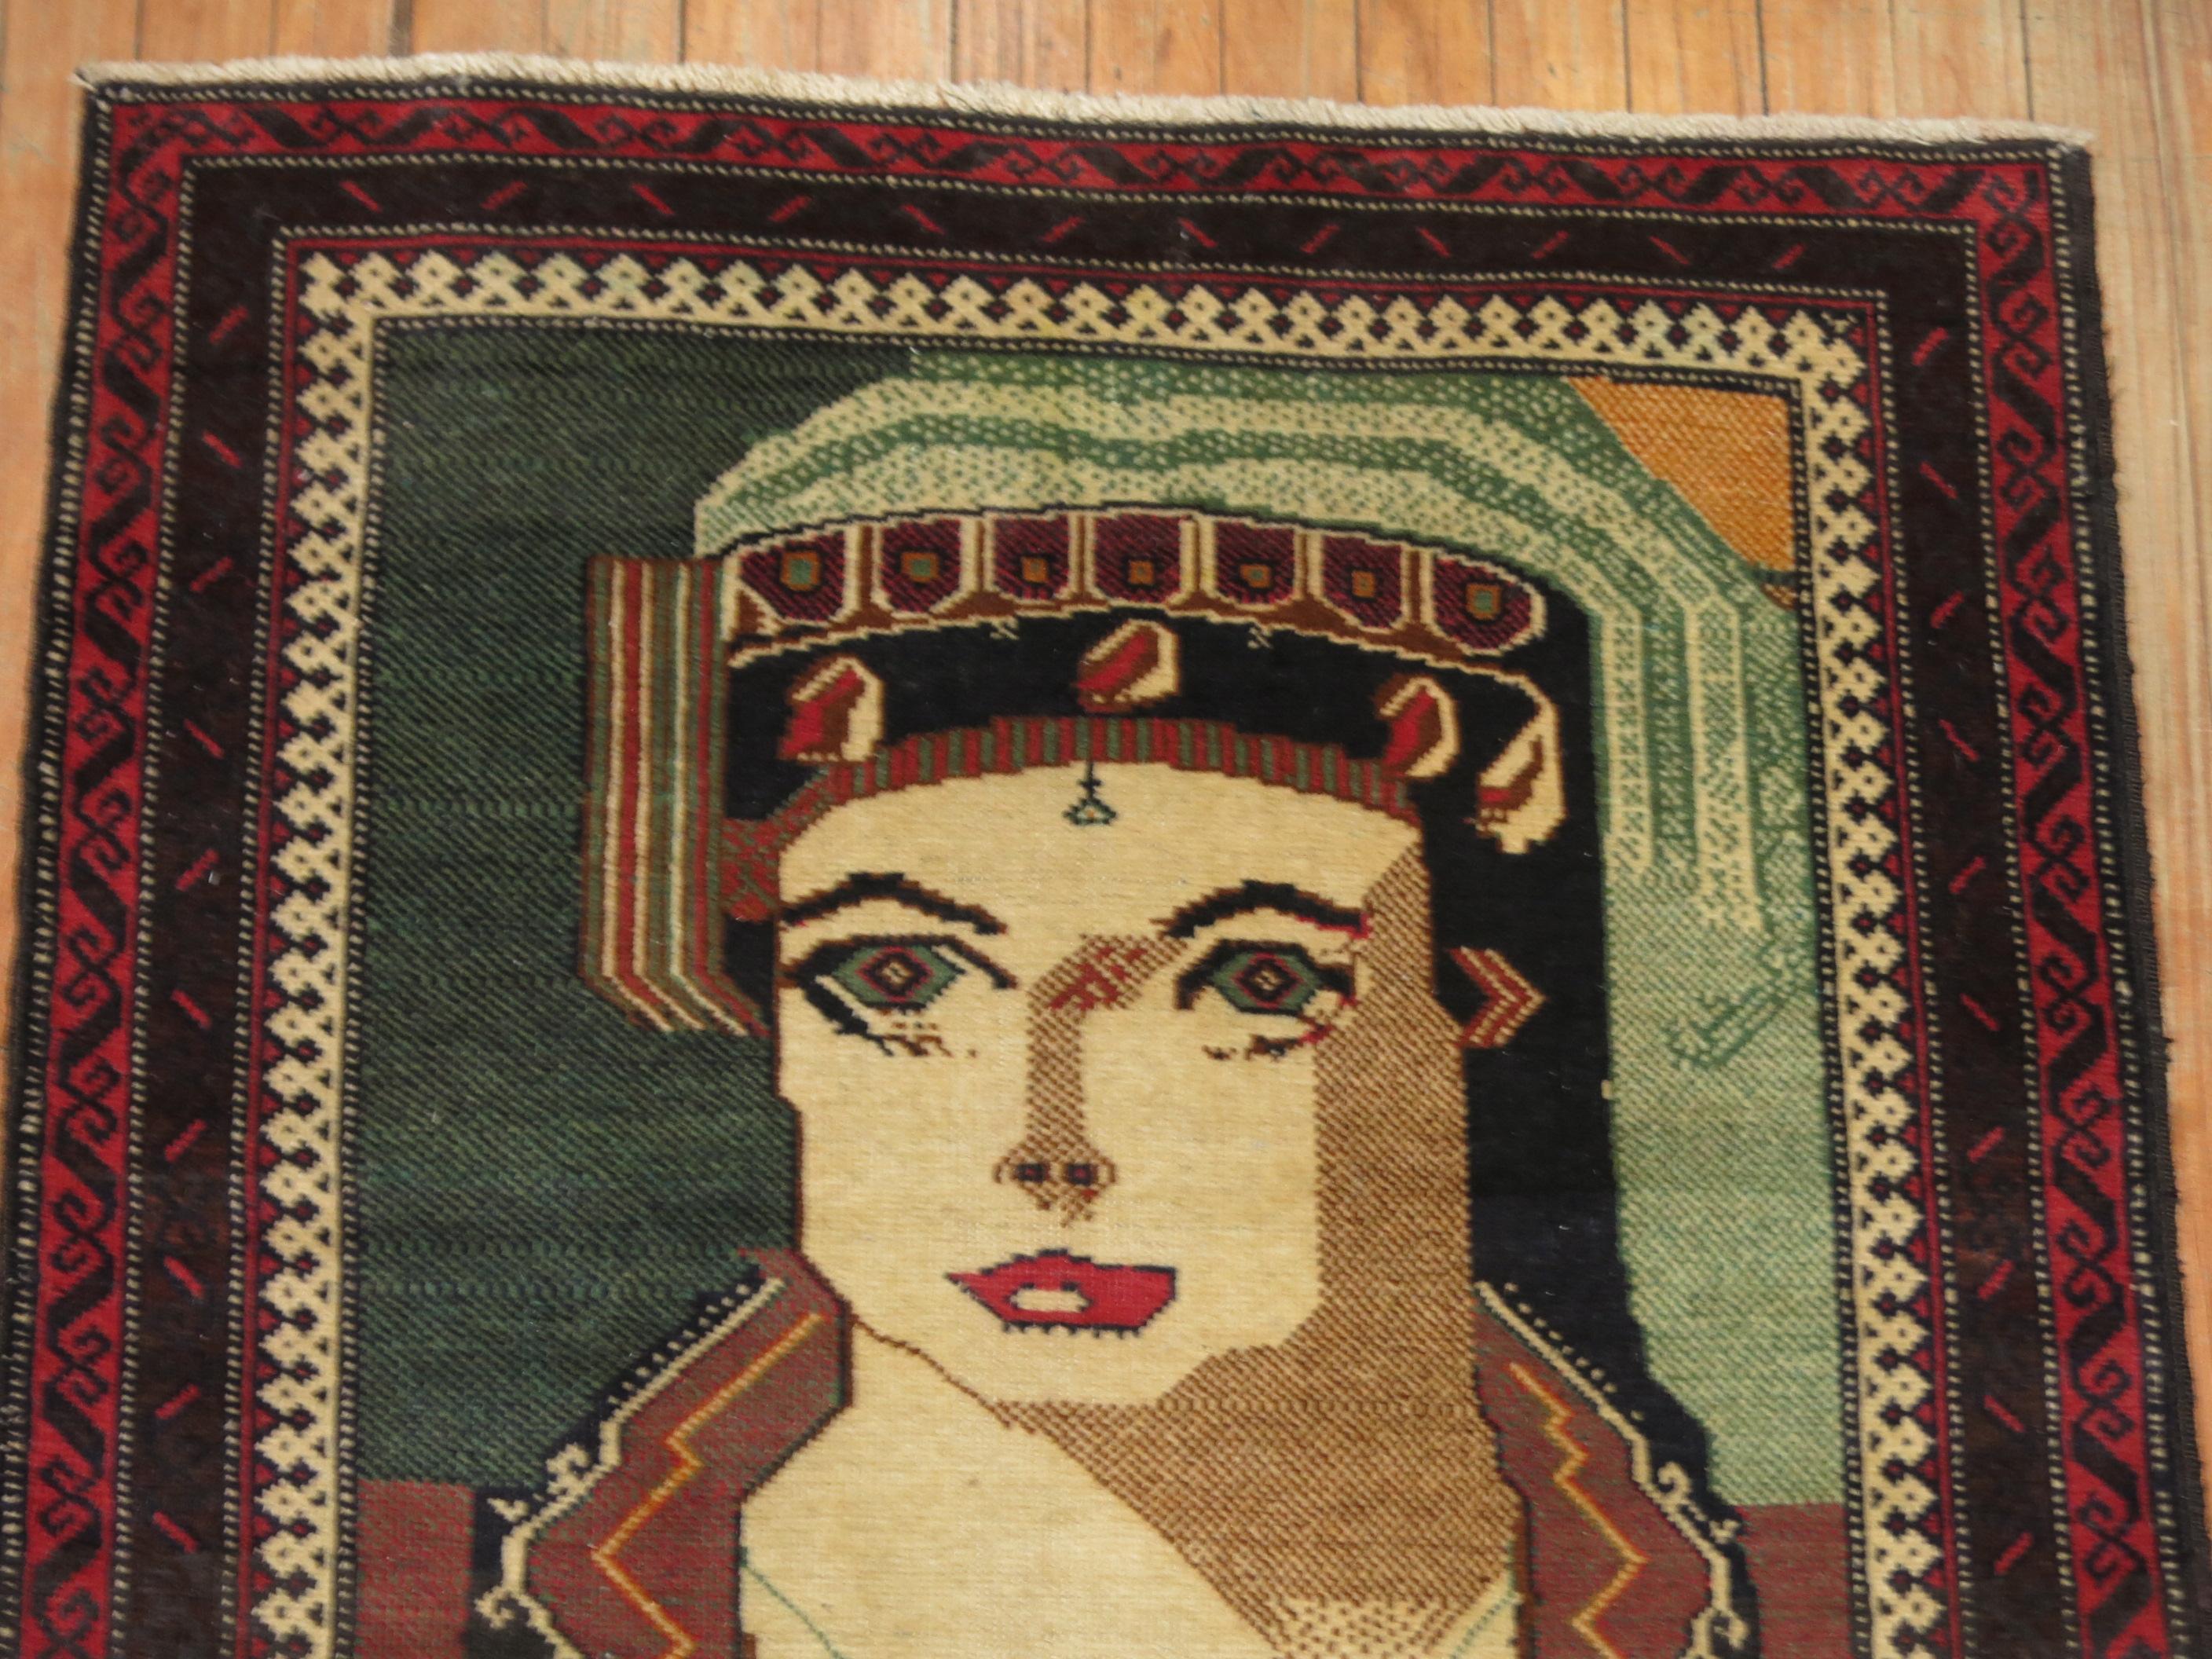 A third quarter one of a kind 20th century Tribal Persian rug depicting what looks to be the king of pop, the late Michael Jackson. It looks like him at least or maybe it’s just a Persian emperor? Use your imagination!

Measures: 2'10